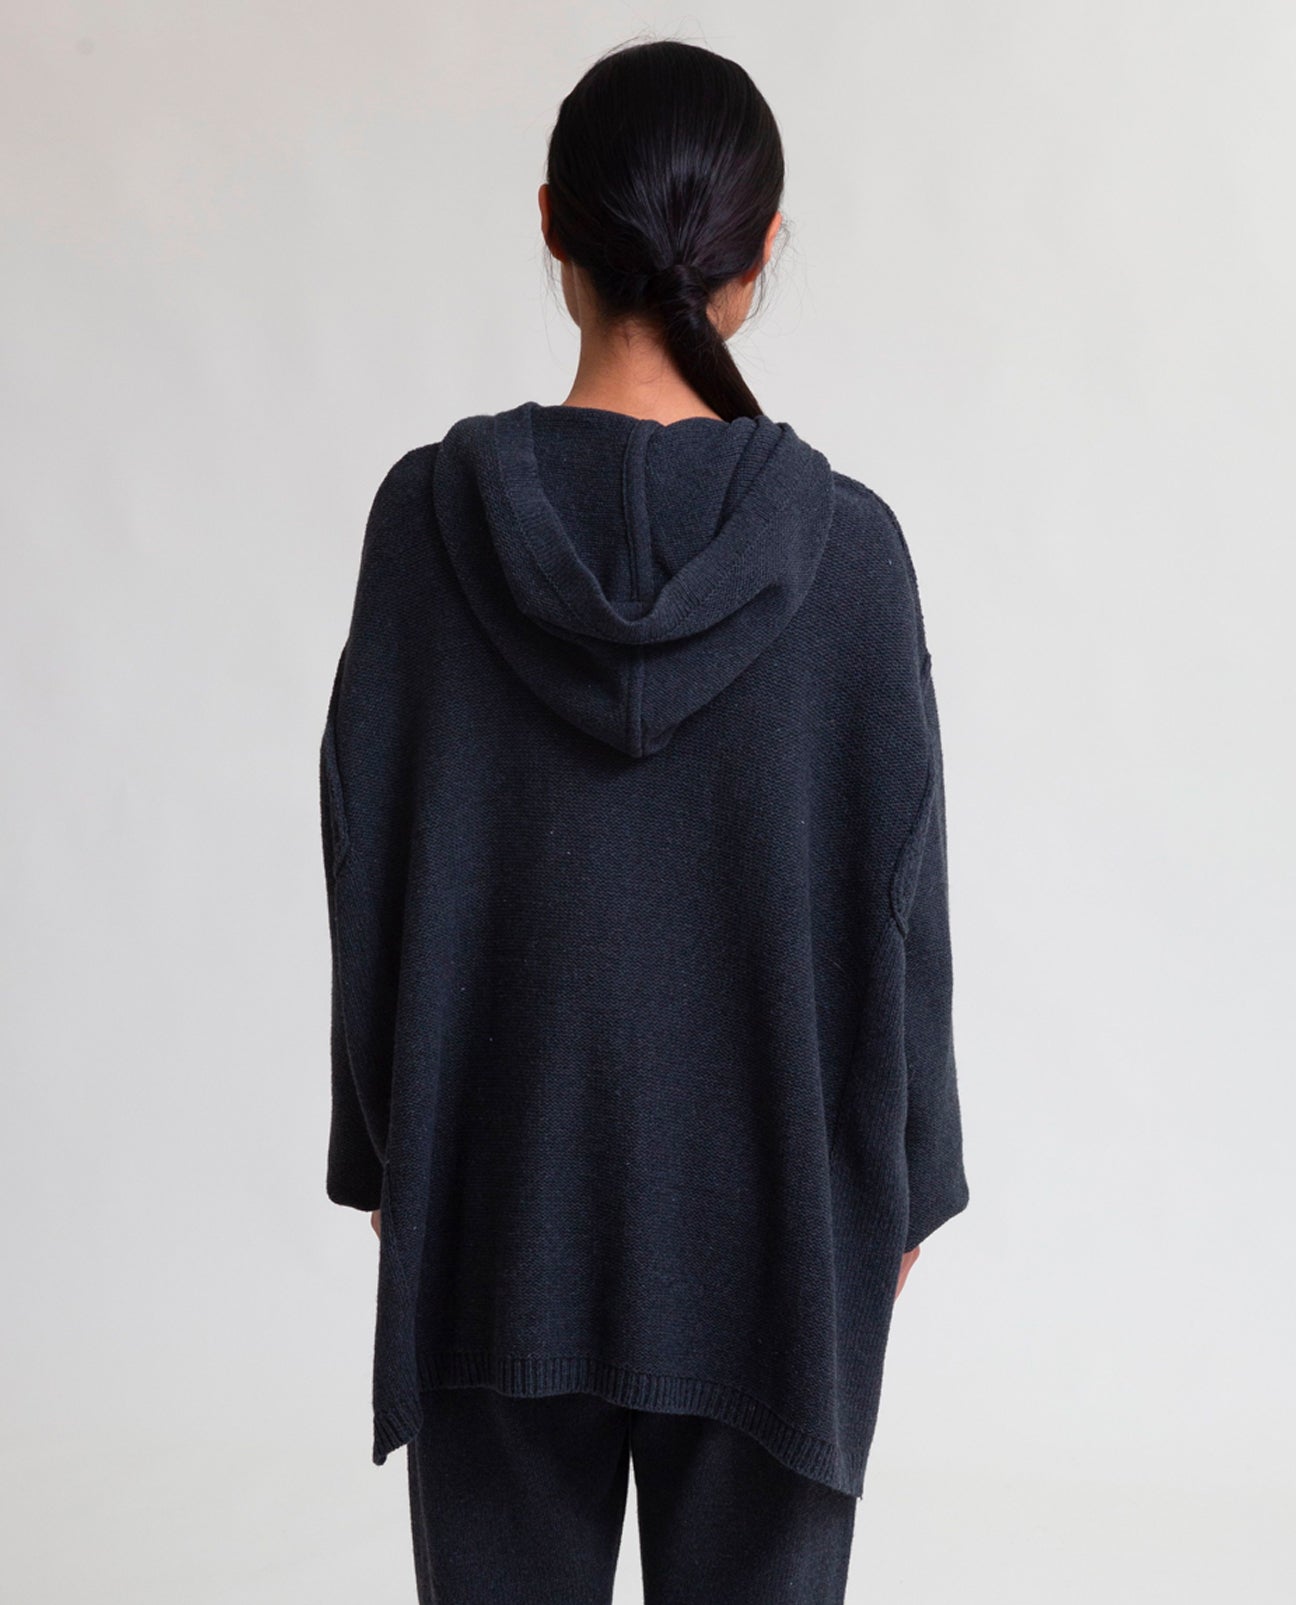 Geraldine Recycled Cotton and Wool Hoodie in Black